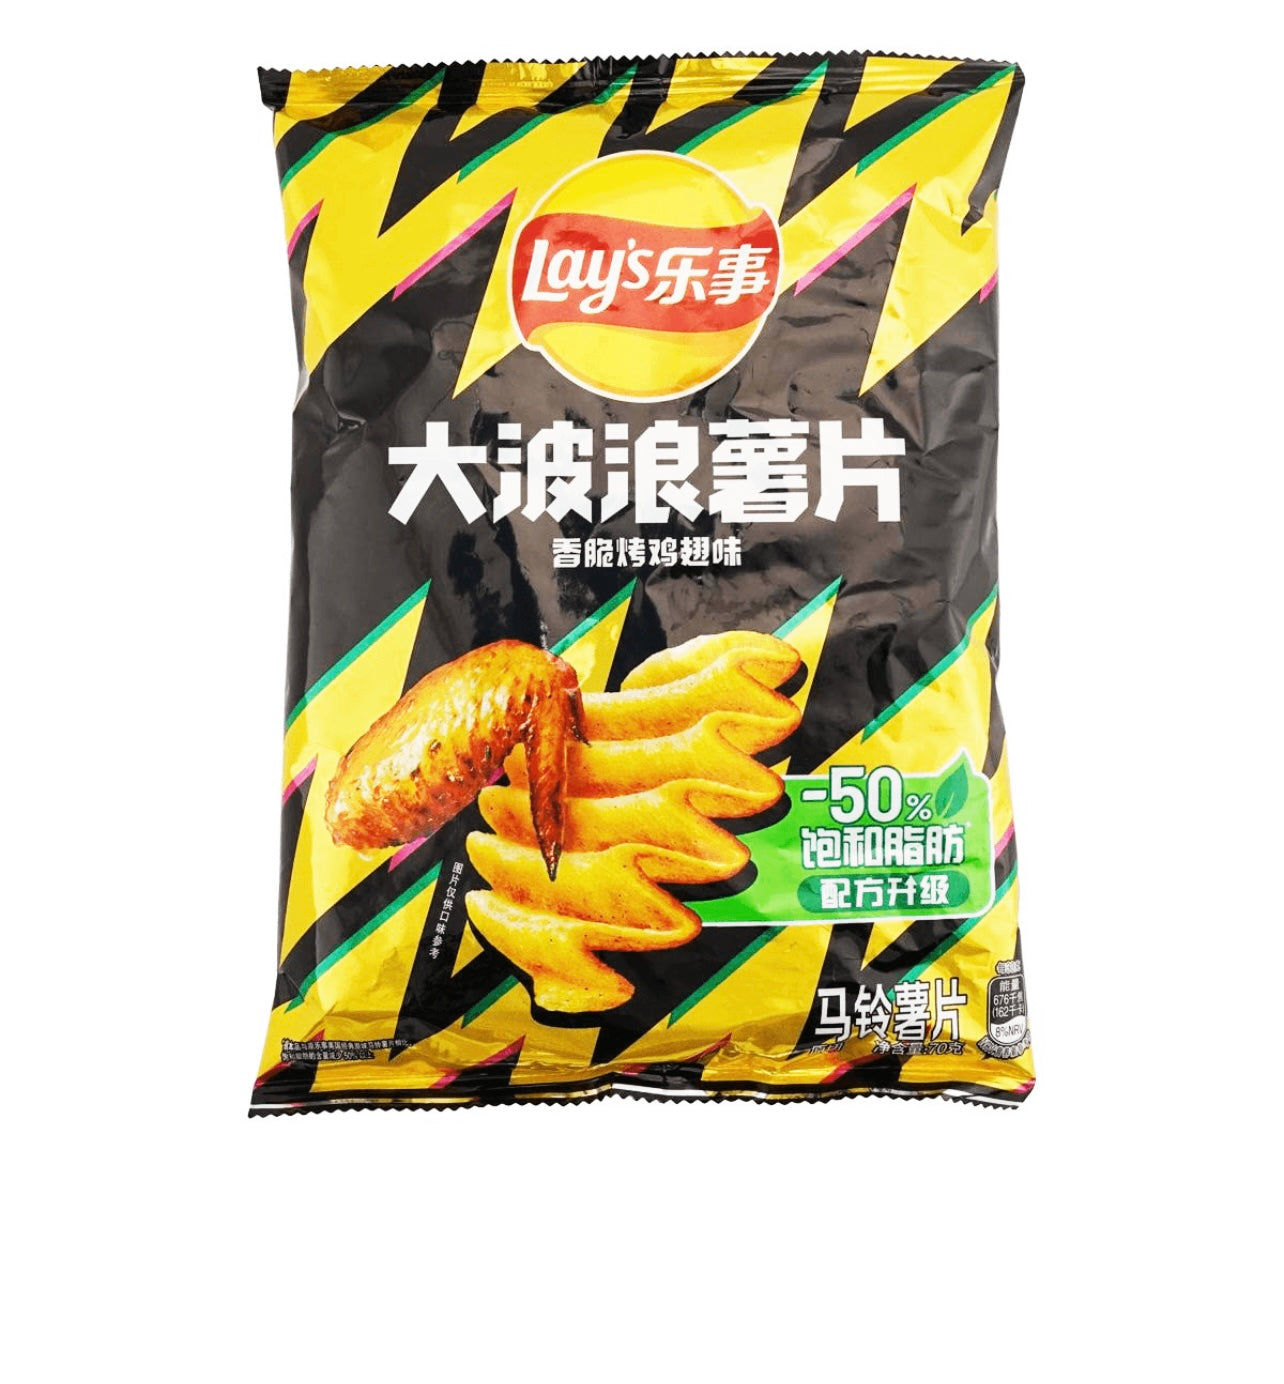 Roasted Chicken Wing Potato
Chips, 2.46oz